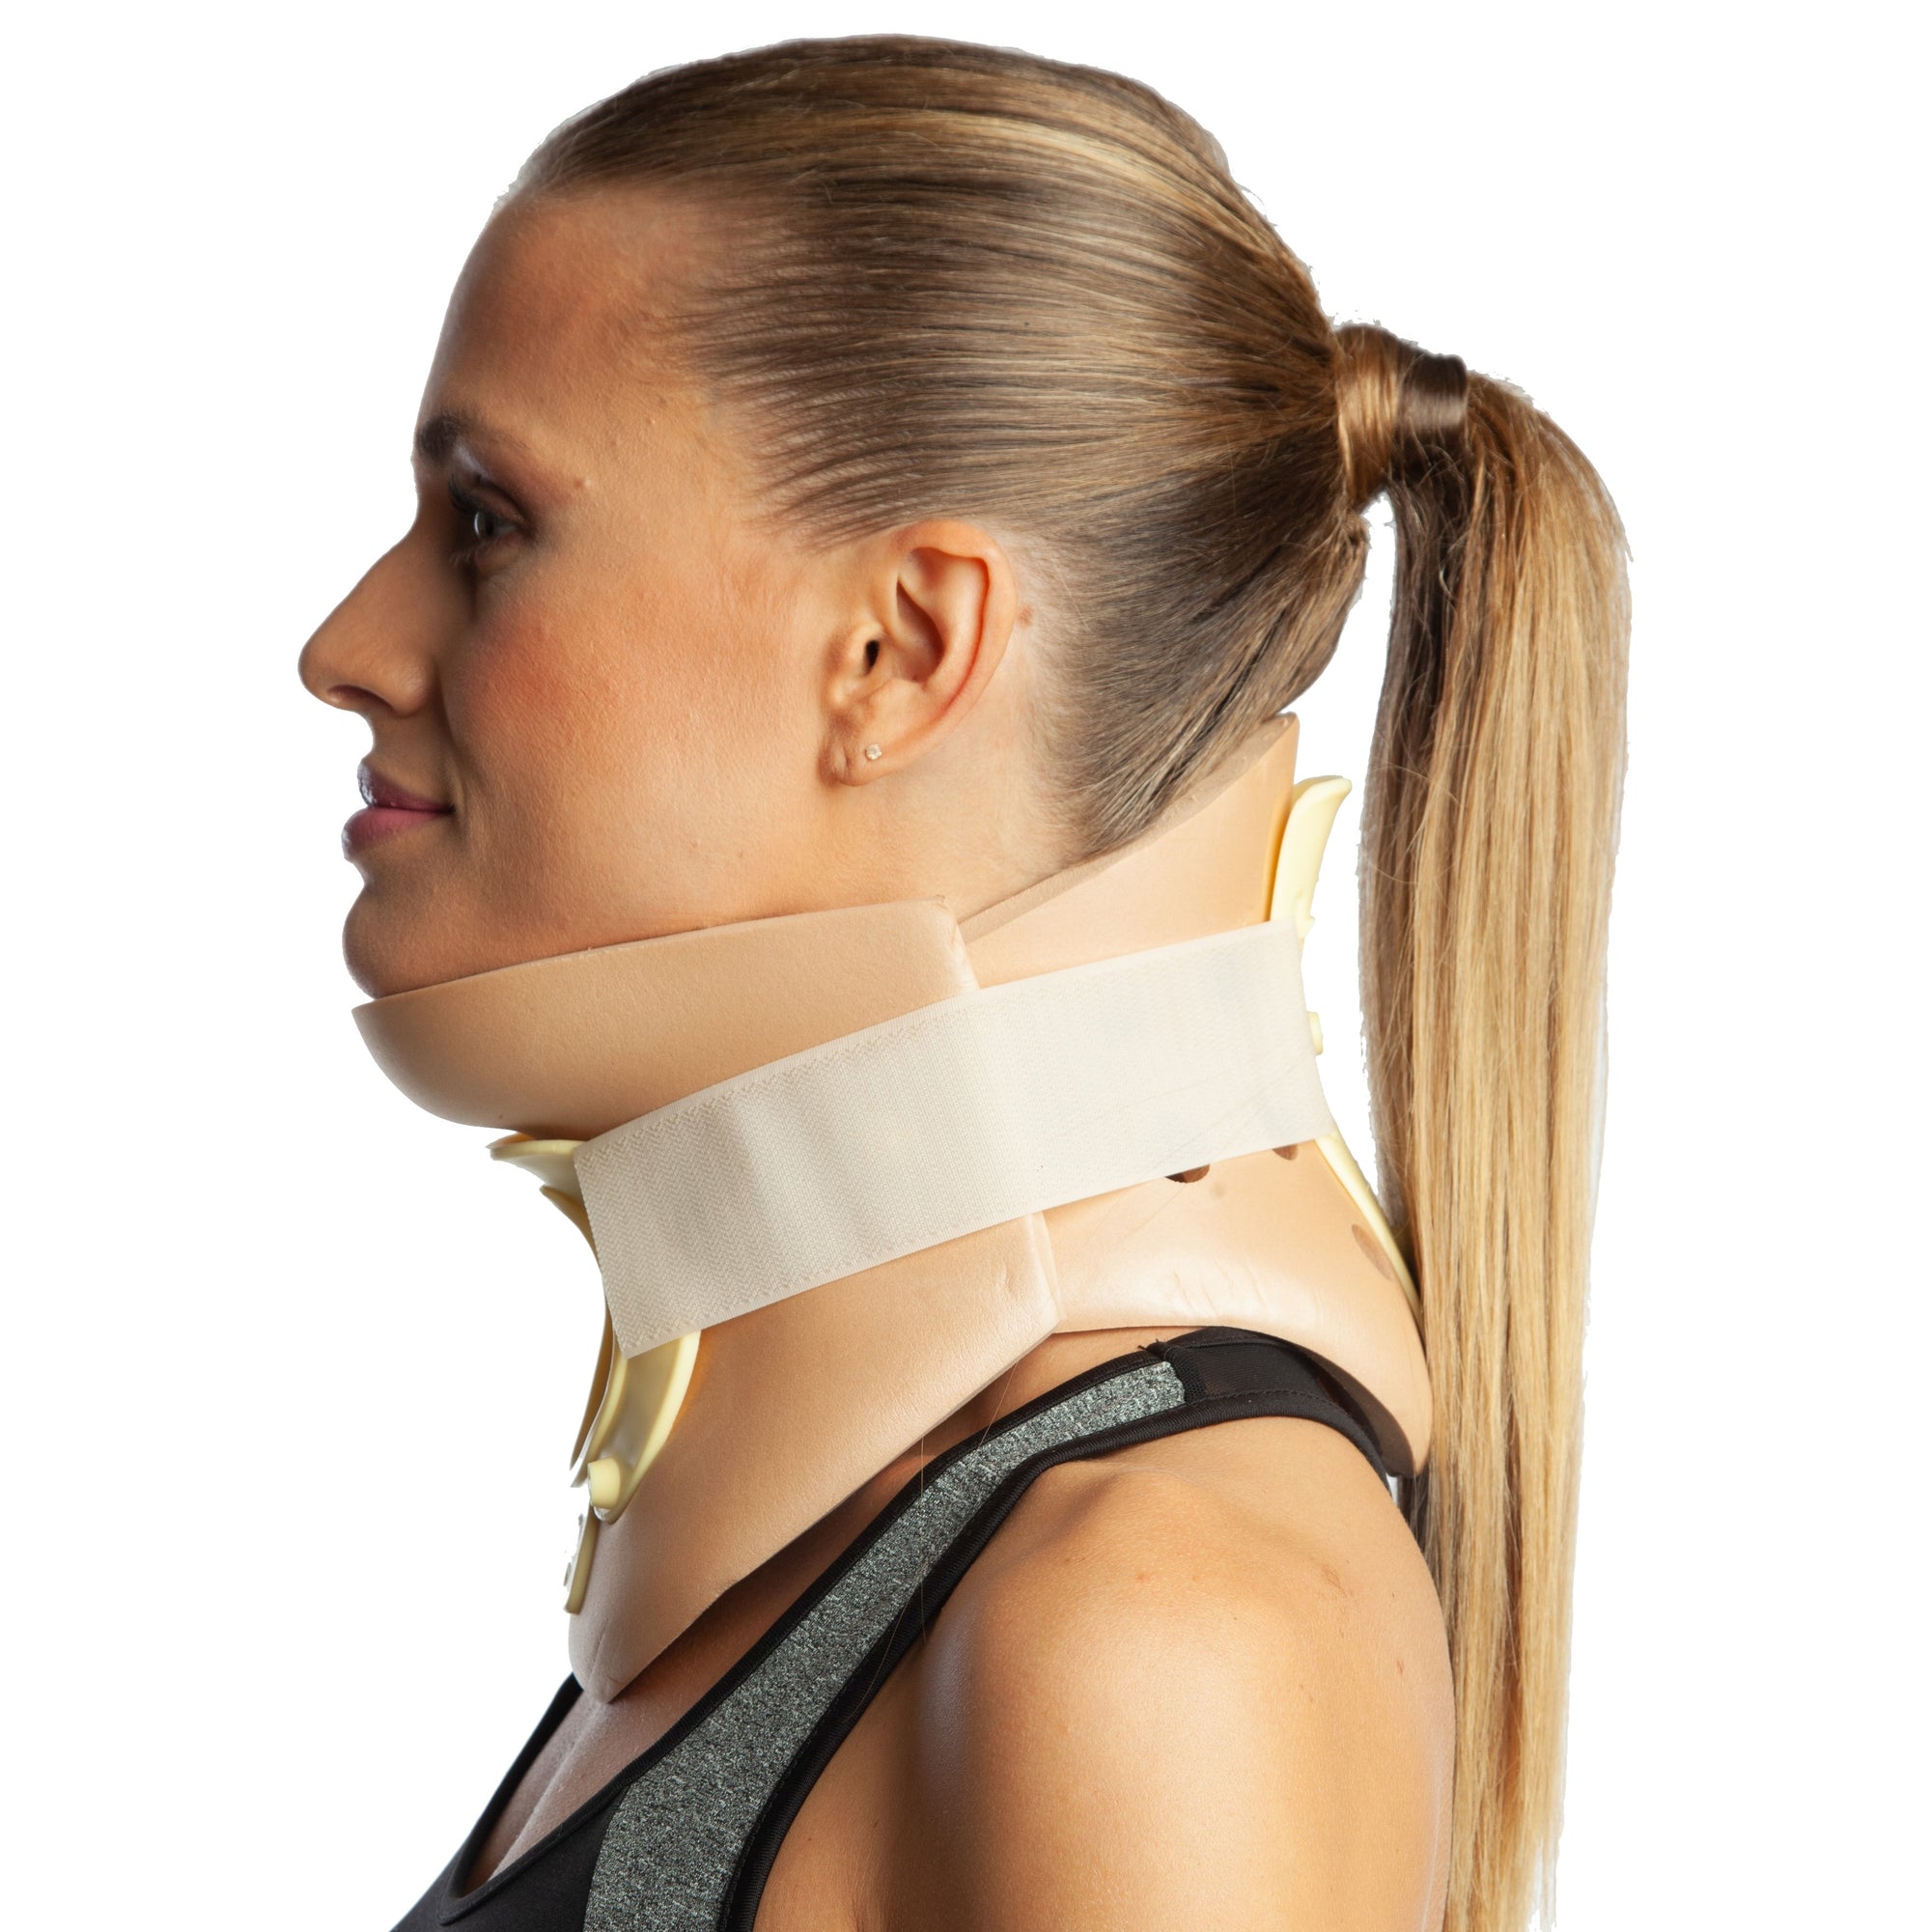 ArmoLine Open Tracheotomy Philadelphia Neck Collar Picture. The item is worn by the model and picture is taken by front side aspect